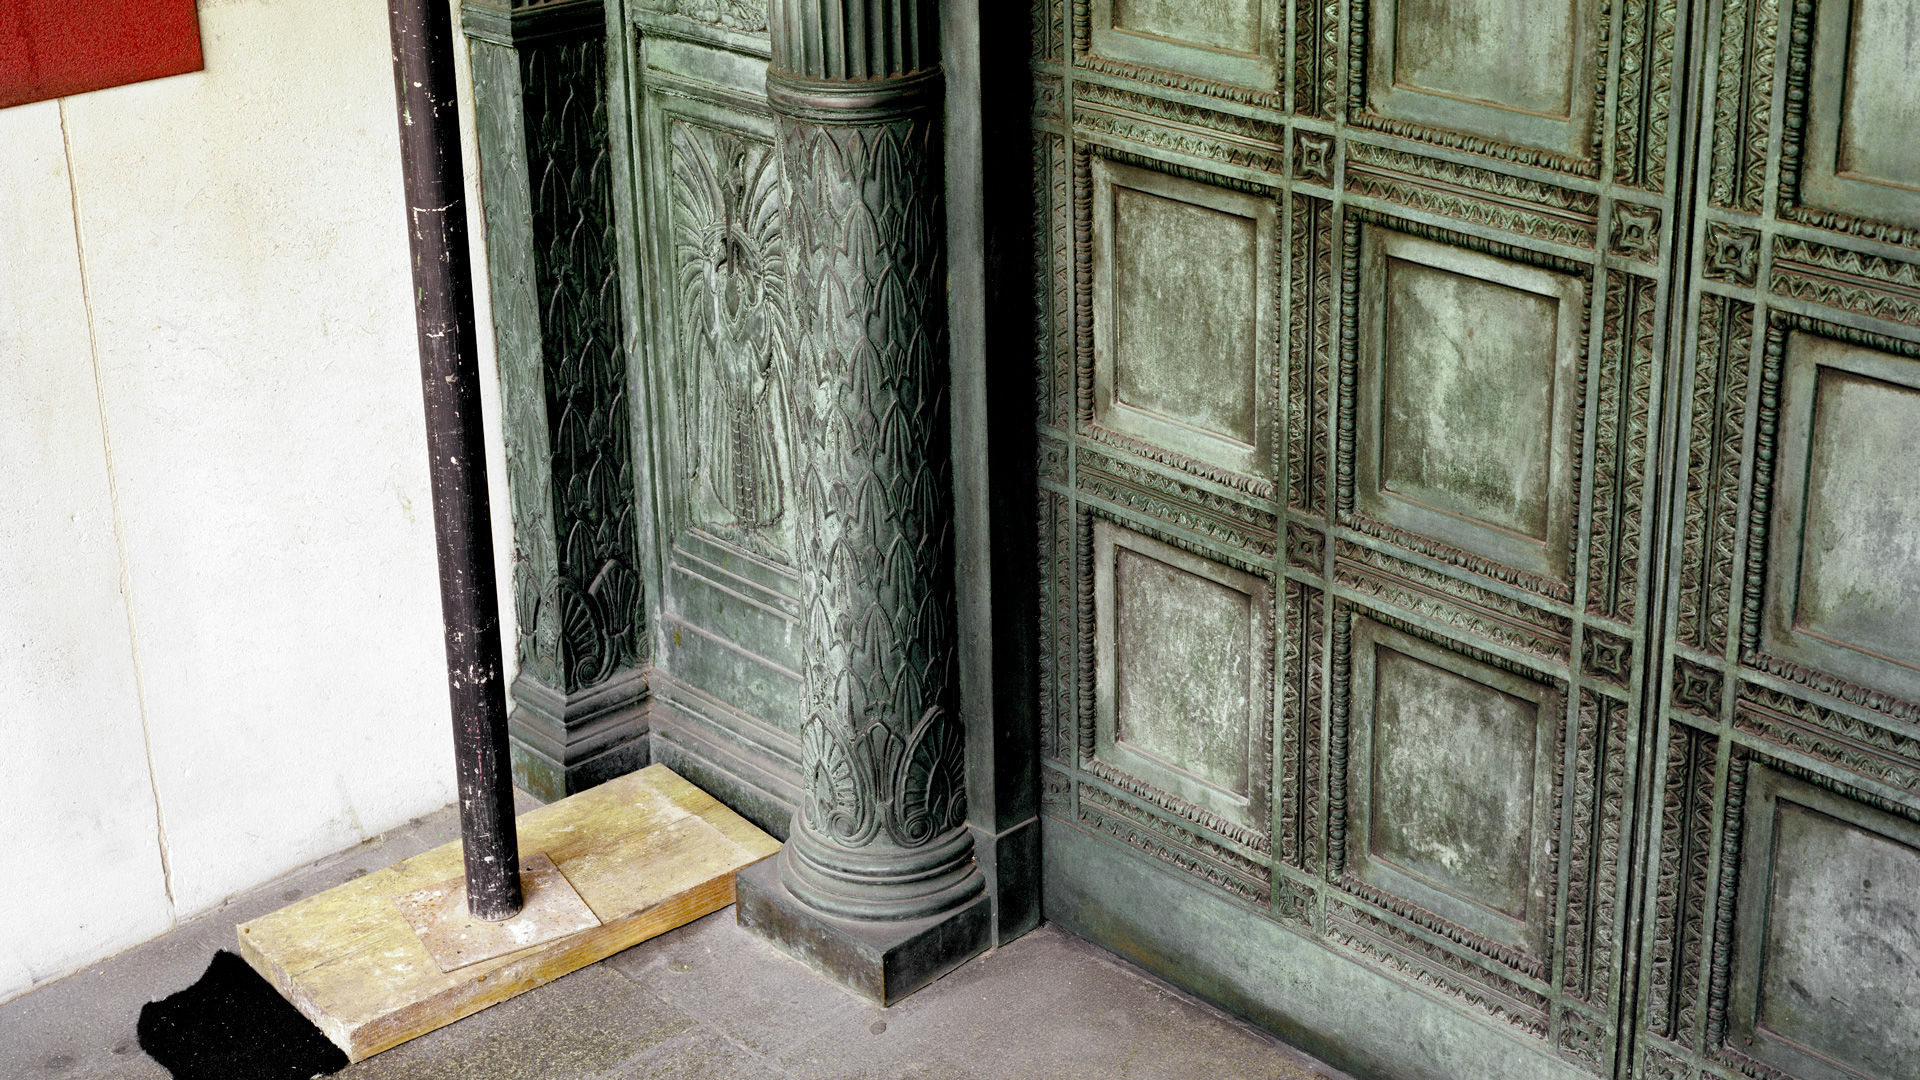 Bronze doors of Martins Bank, which closed in 1968. Liverpool, England, 2015